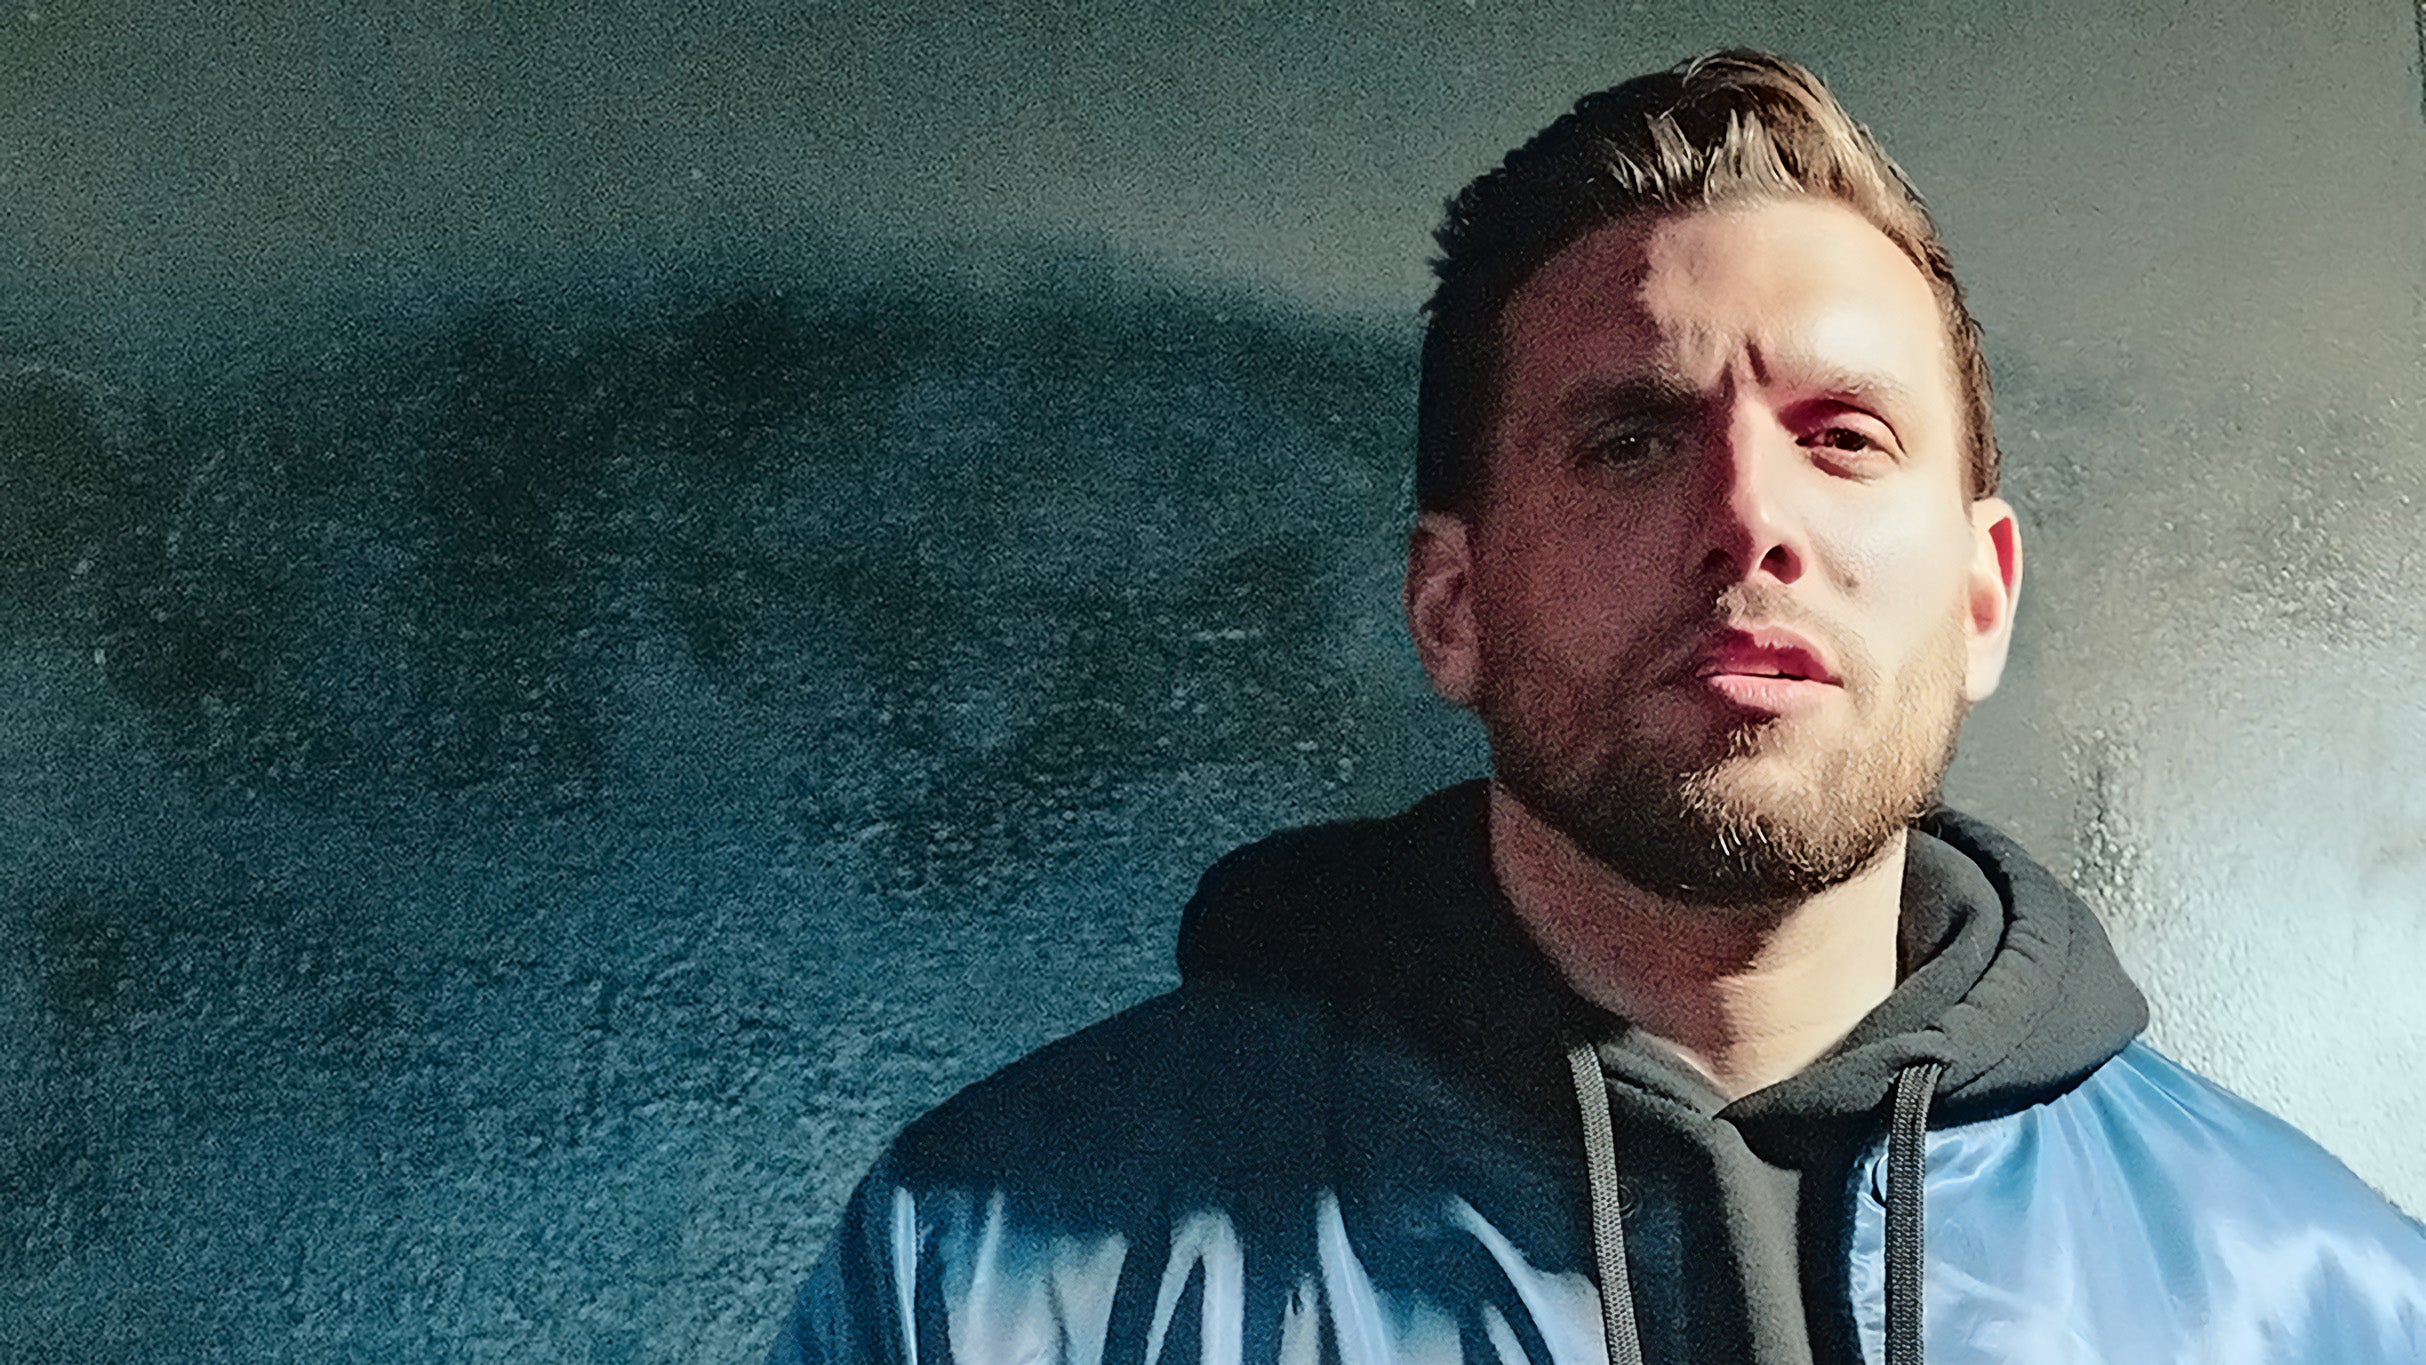 accurate presale c0de for Chris Distefano Live affordable tickets in San Jose